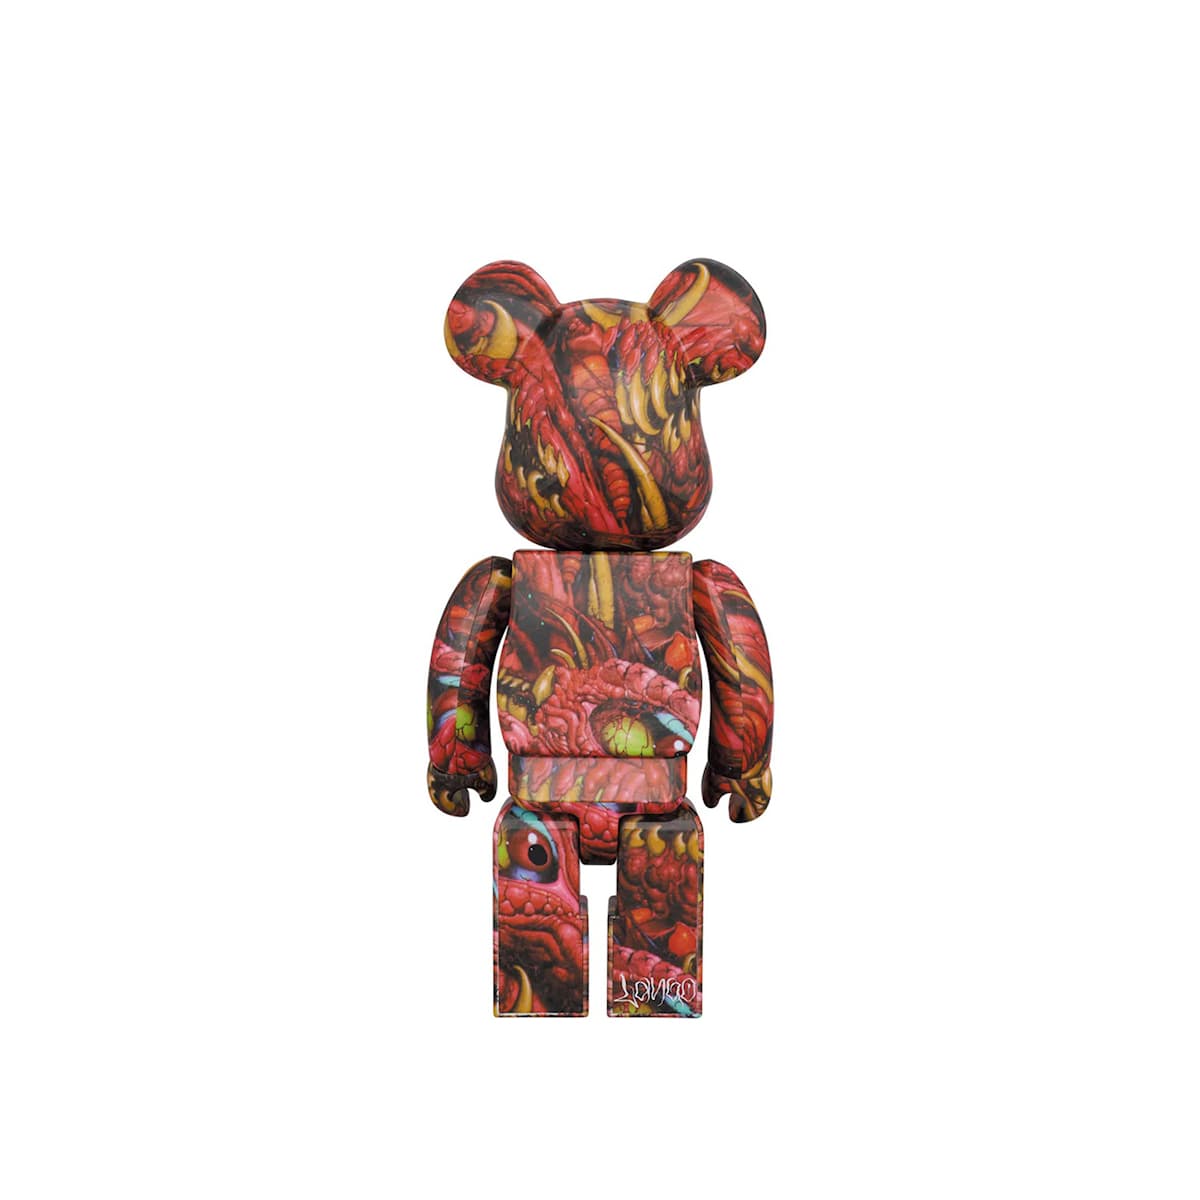 Missoni teddy bear, elephant a designer toy for kids and adults